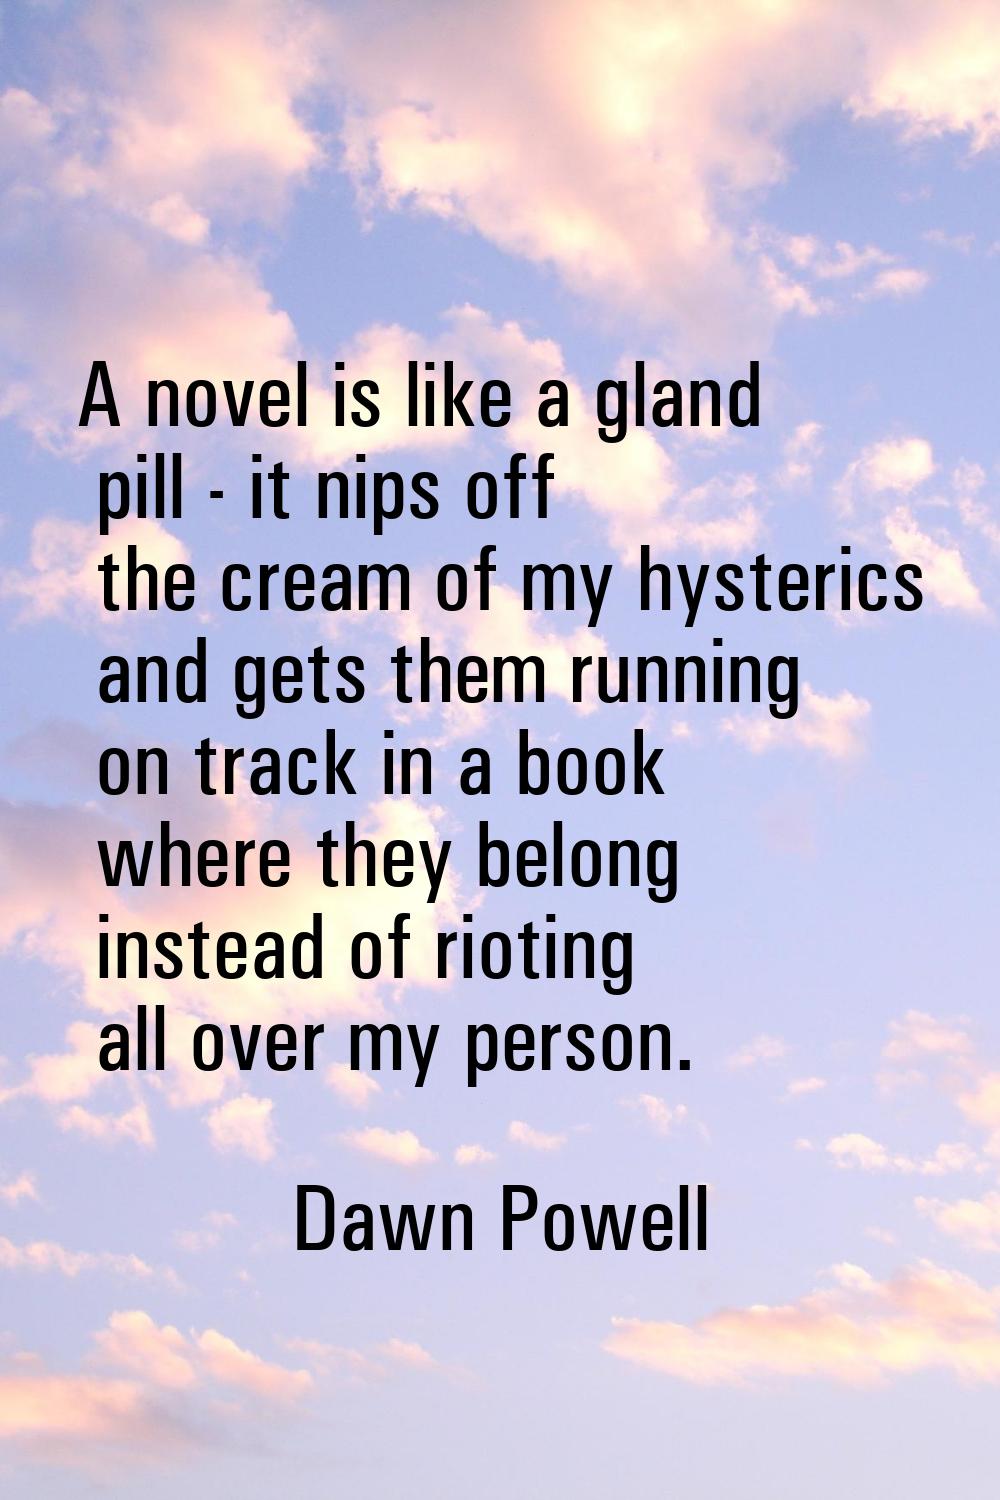 A novel is like a gland pill - it nips off the cream of my hysterics and gets them running on track